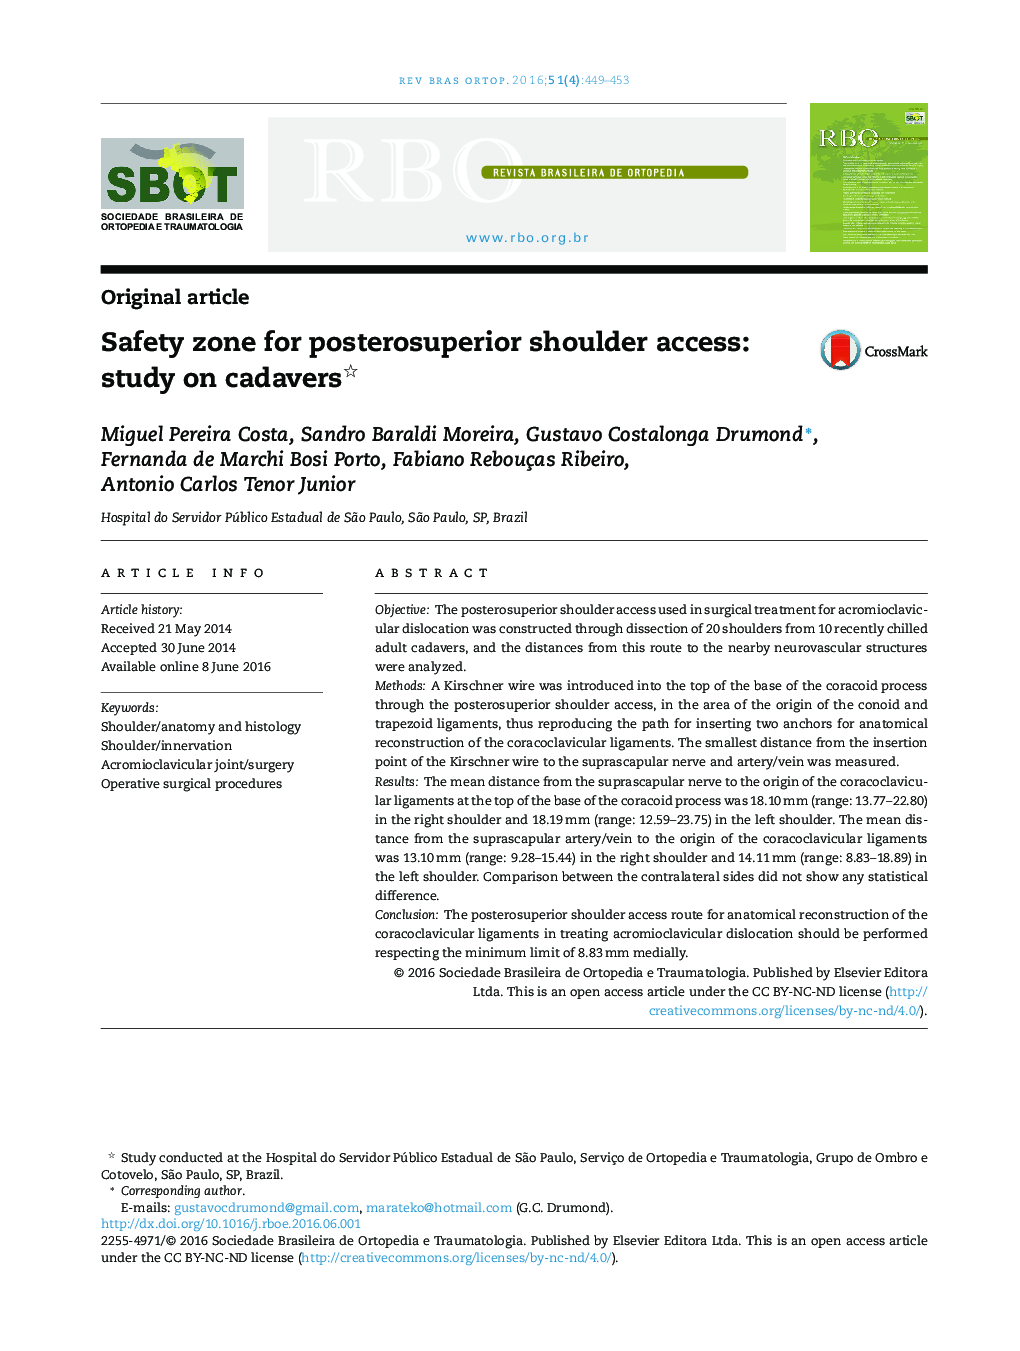 Safety zone for posterosuperior shoulder access: study on cadavers 